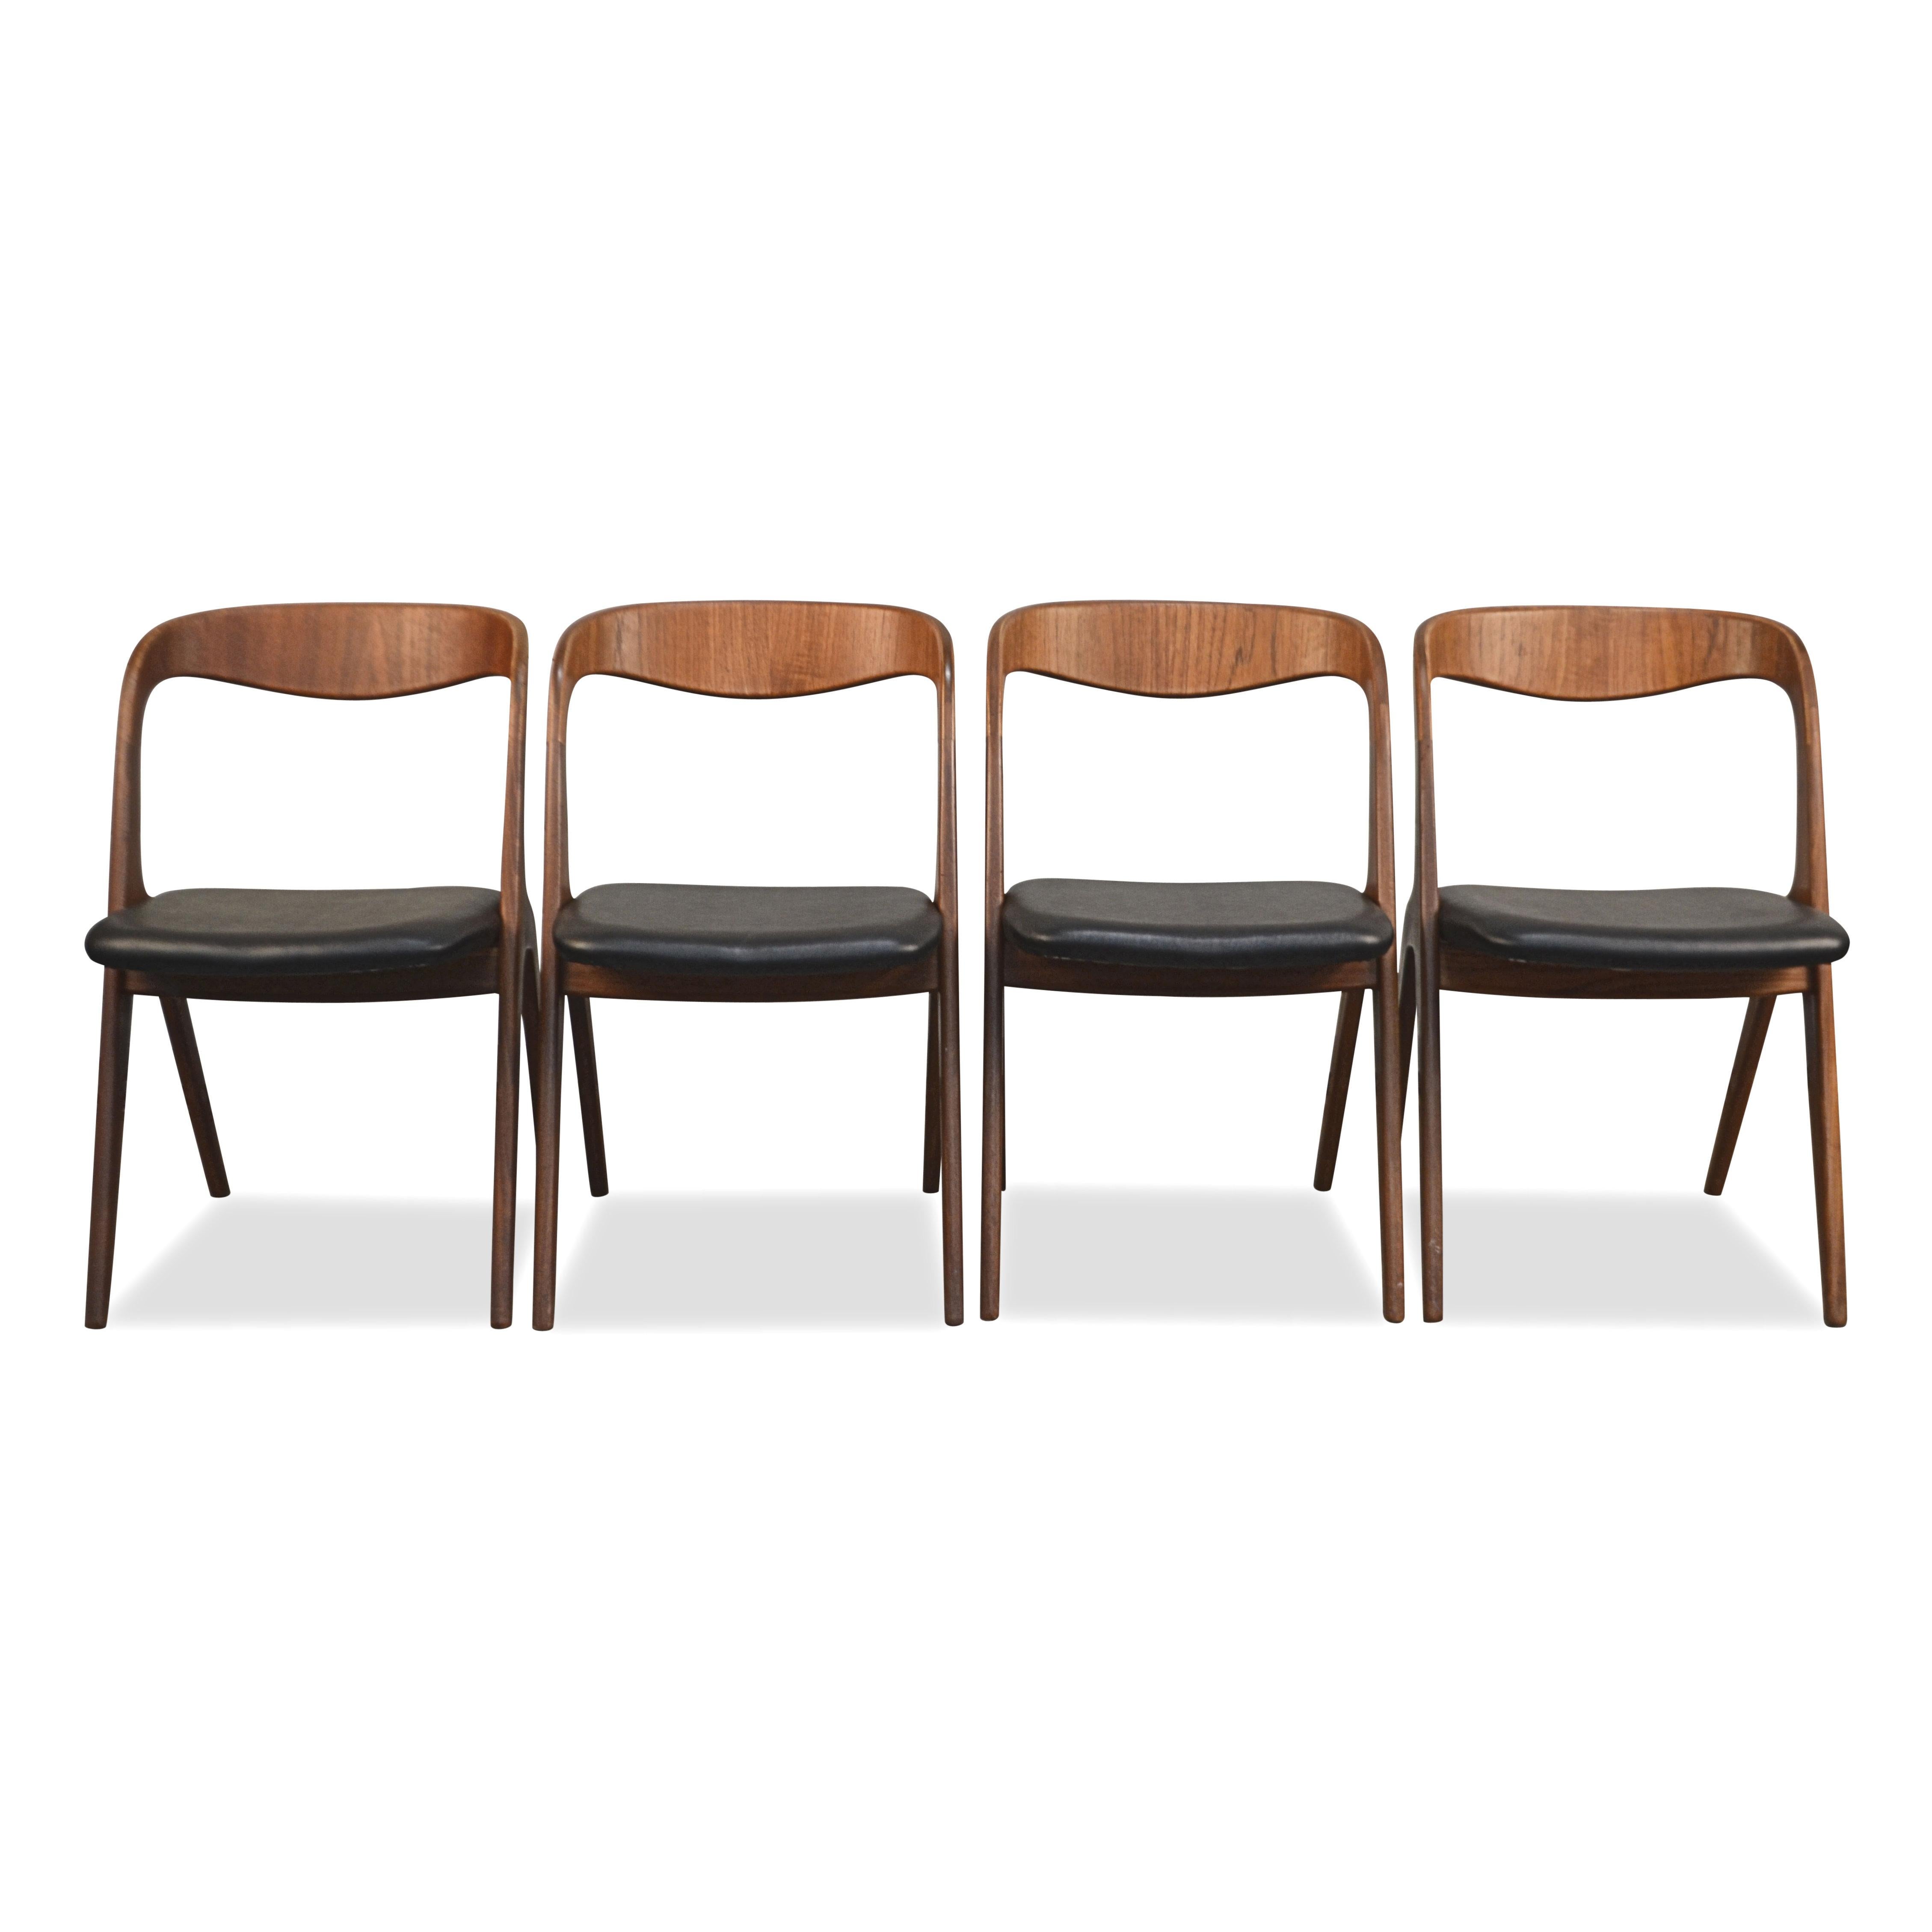 Set of four vintage dining chairs designed by Johannes Andersen manufactured by Danish manufacturer Vamo Sonderborg. These model Sonja chairs feature an organic design, with solid teak curved backrests flowing naturally into the legs. All chairs